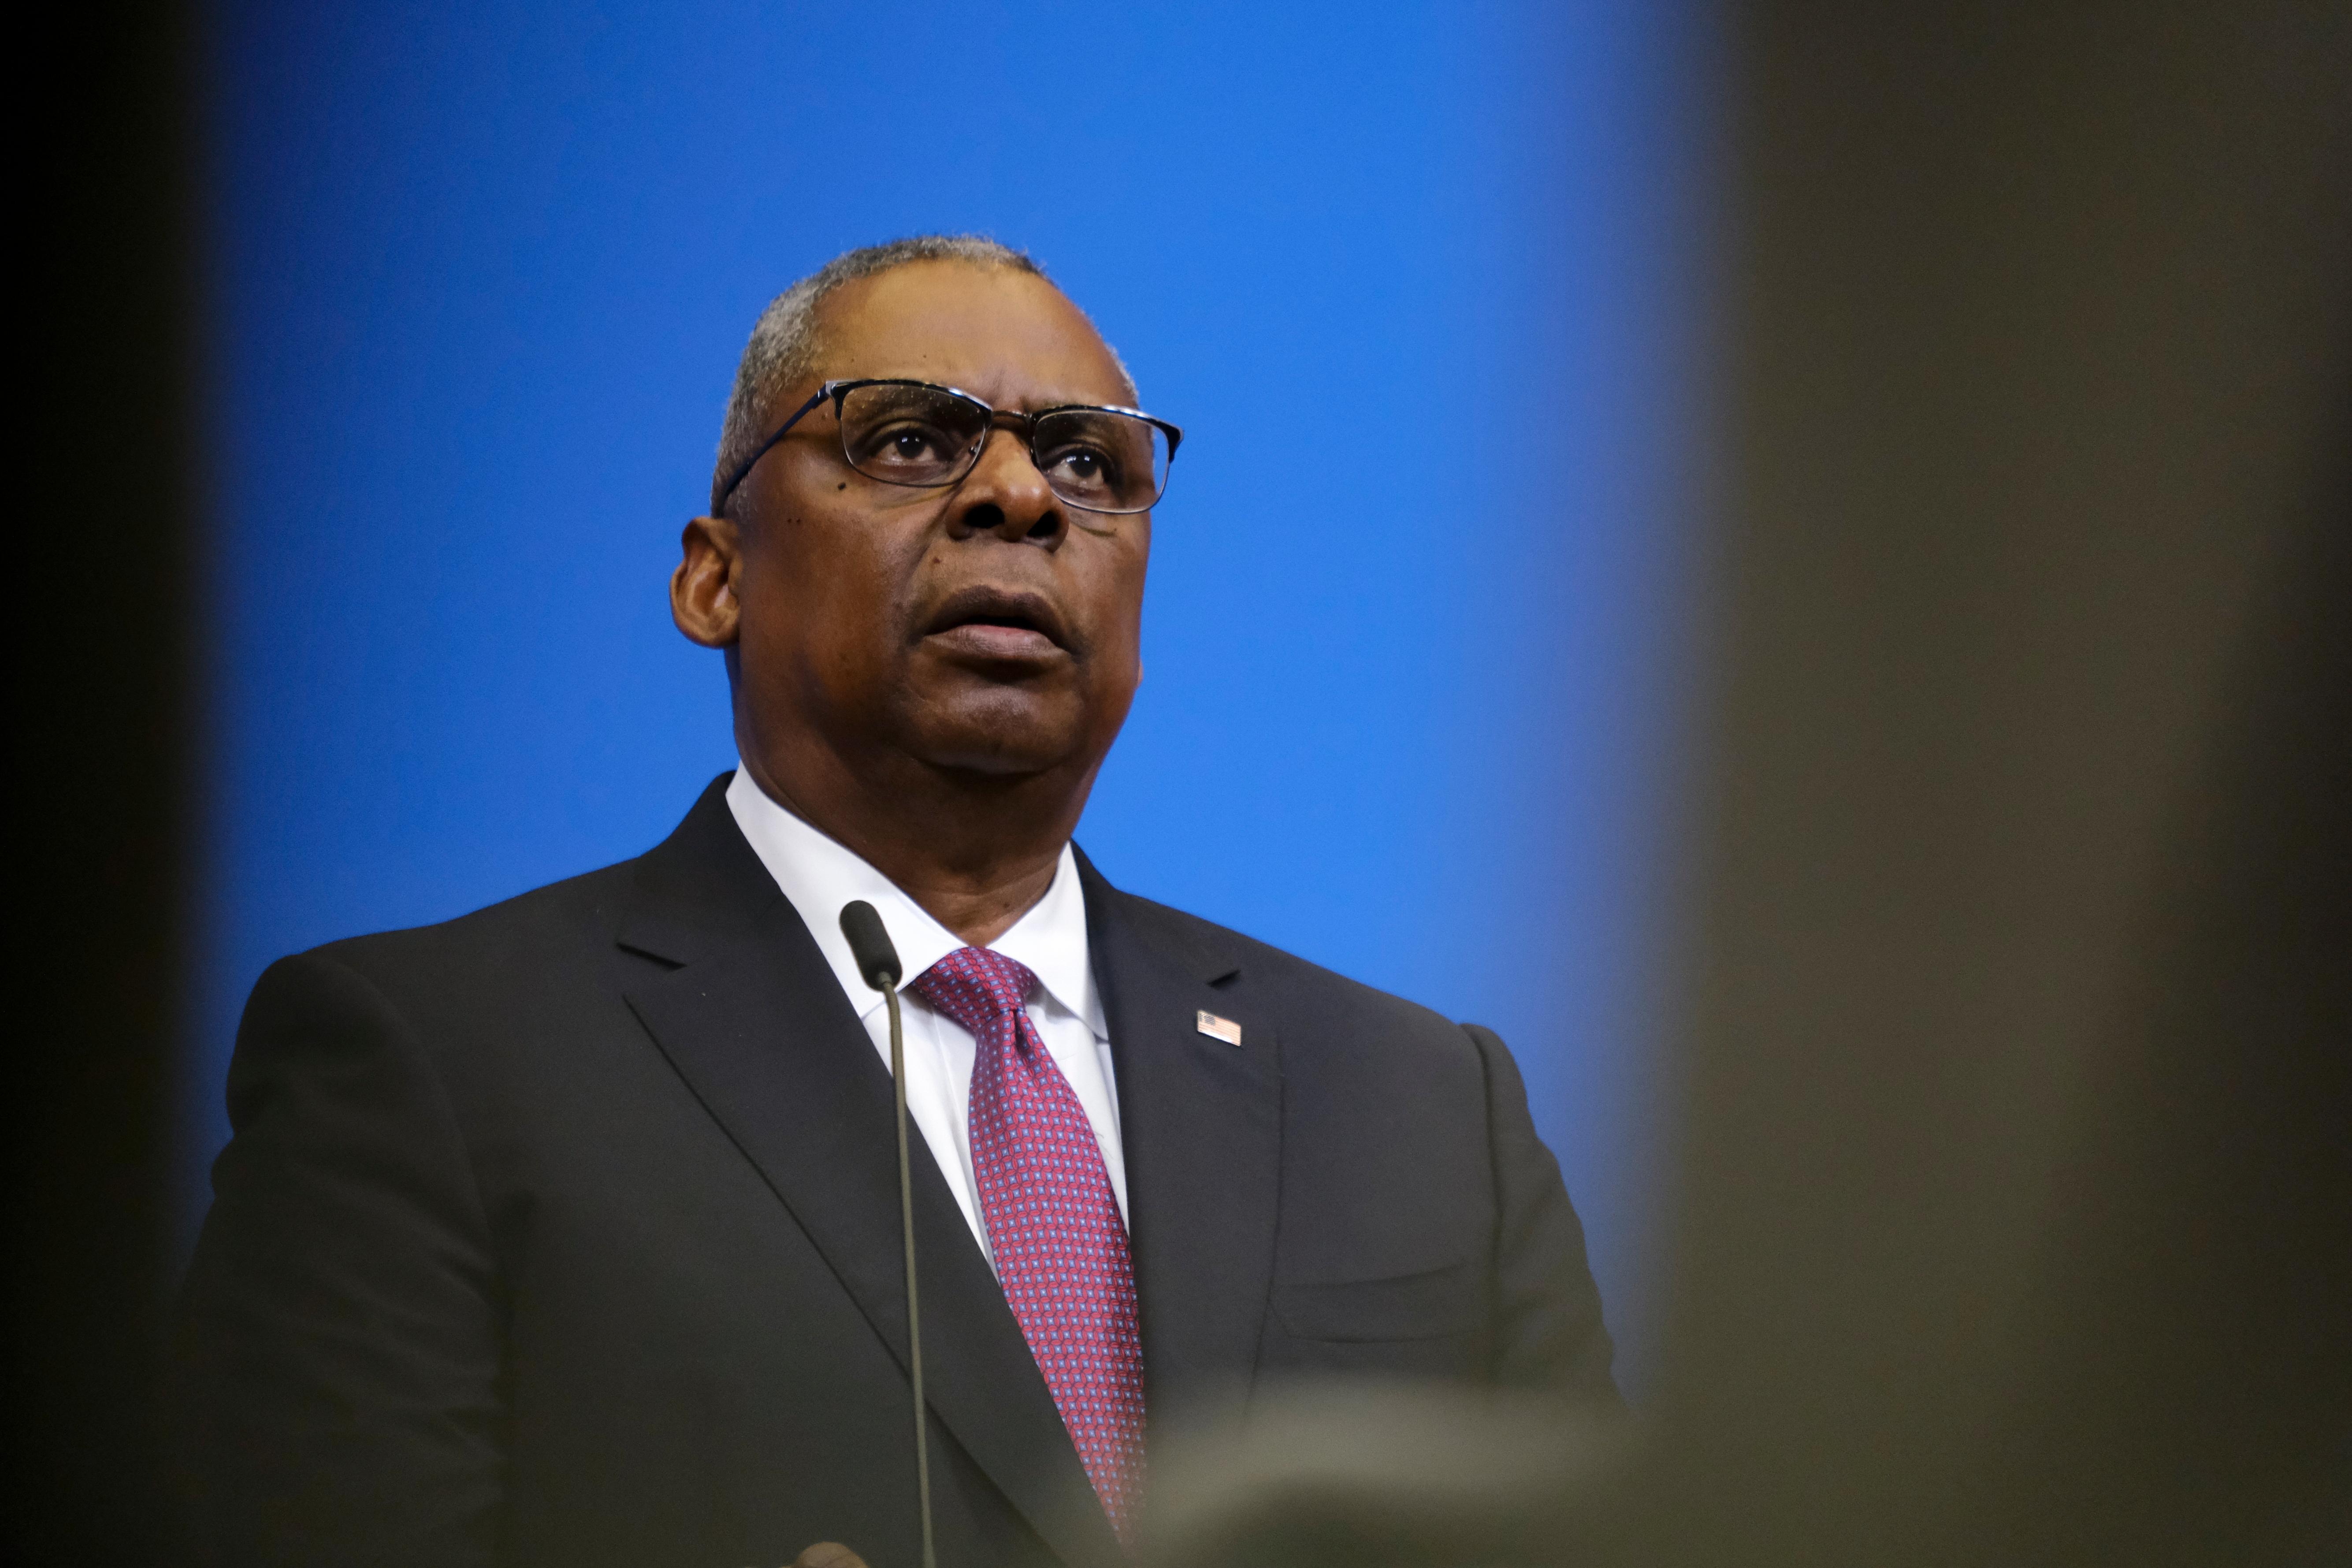 US Defense Secretary Lloyd Austin holds a press conference at the end of a two-day meeting of NATO Defence ministers at the NATO headquarters in Brussels on February 15, 2023.